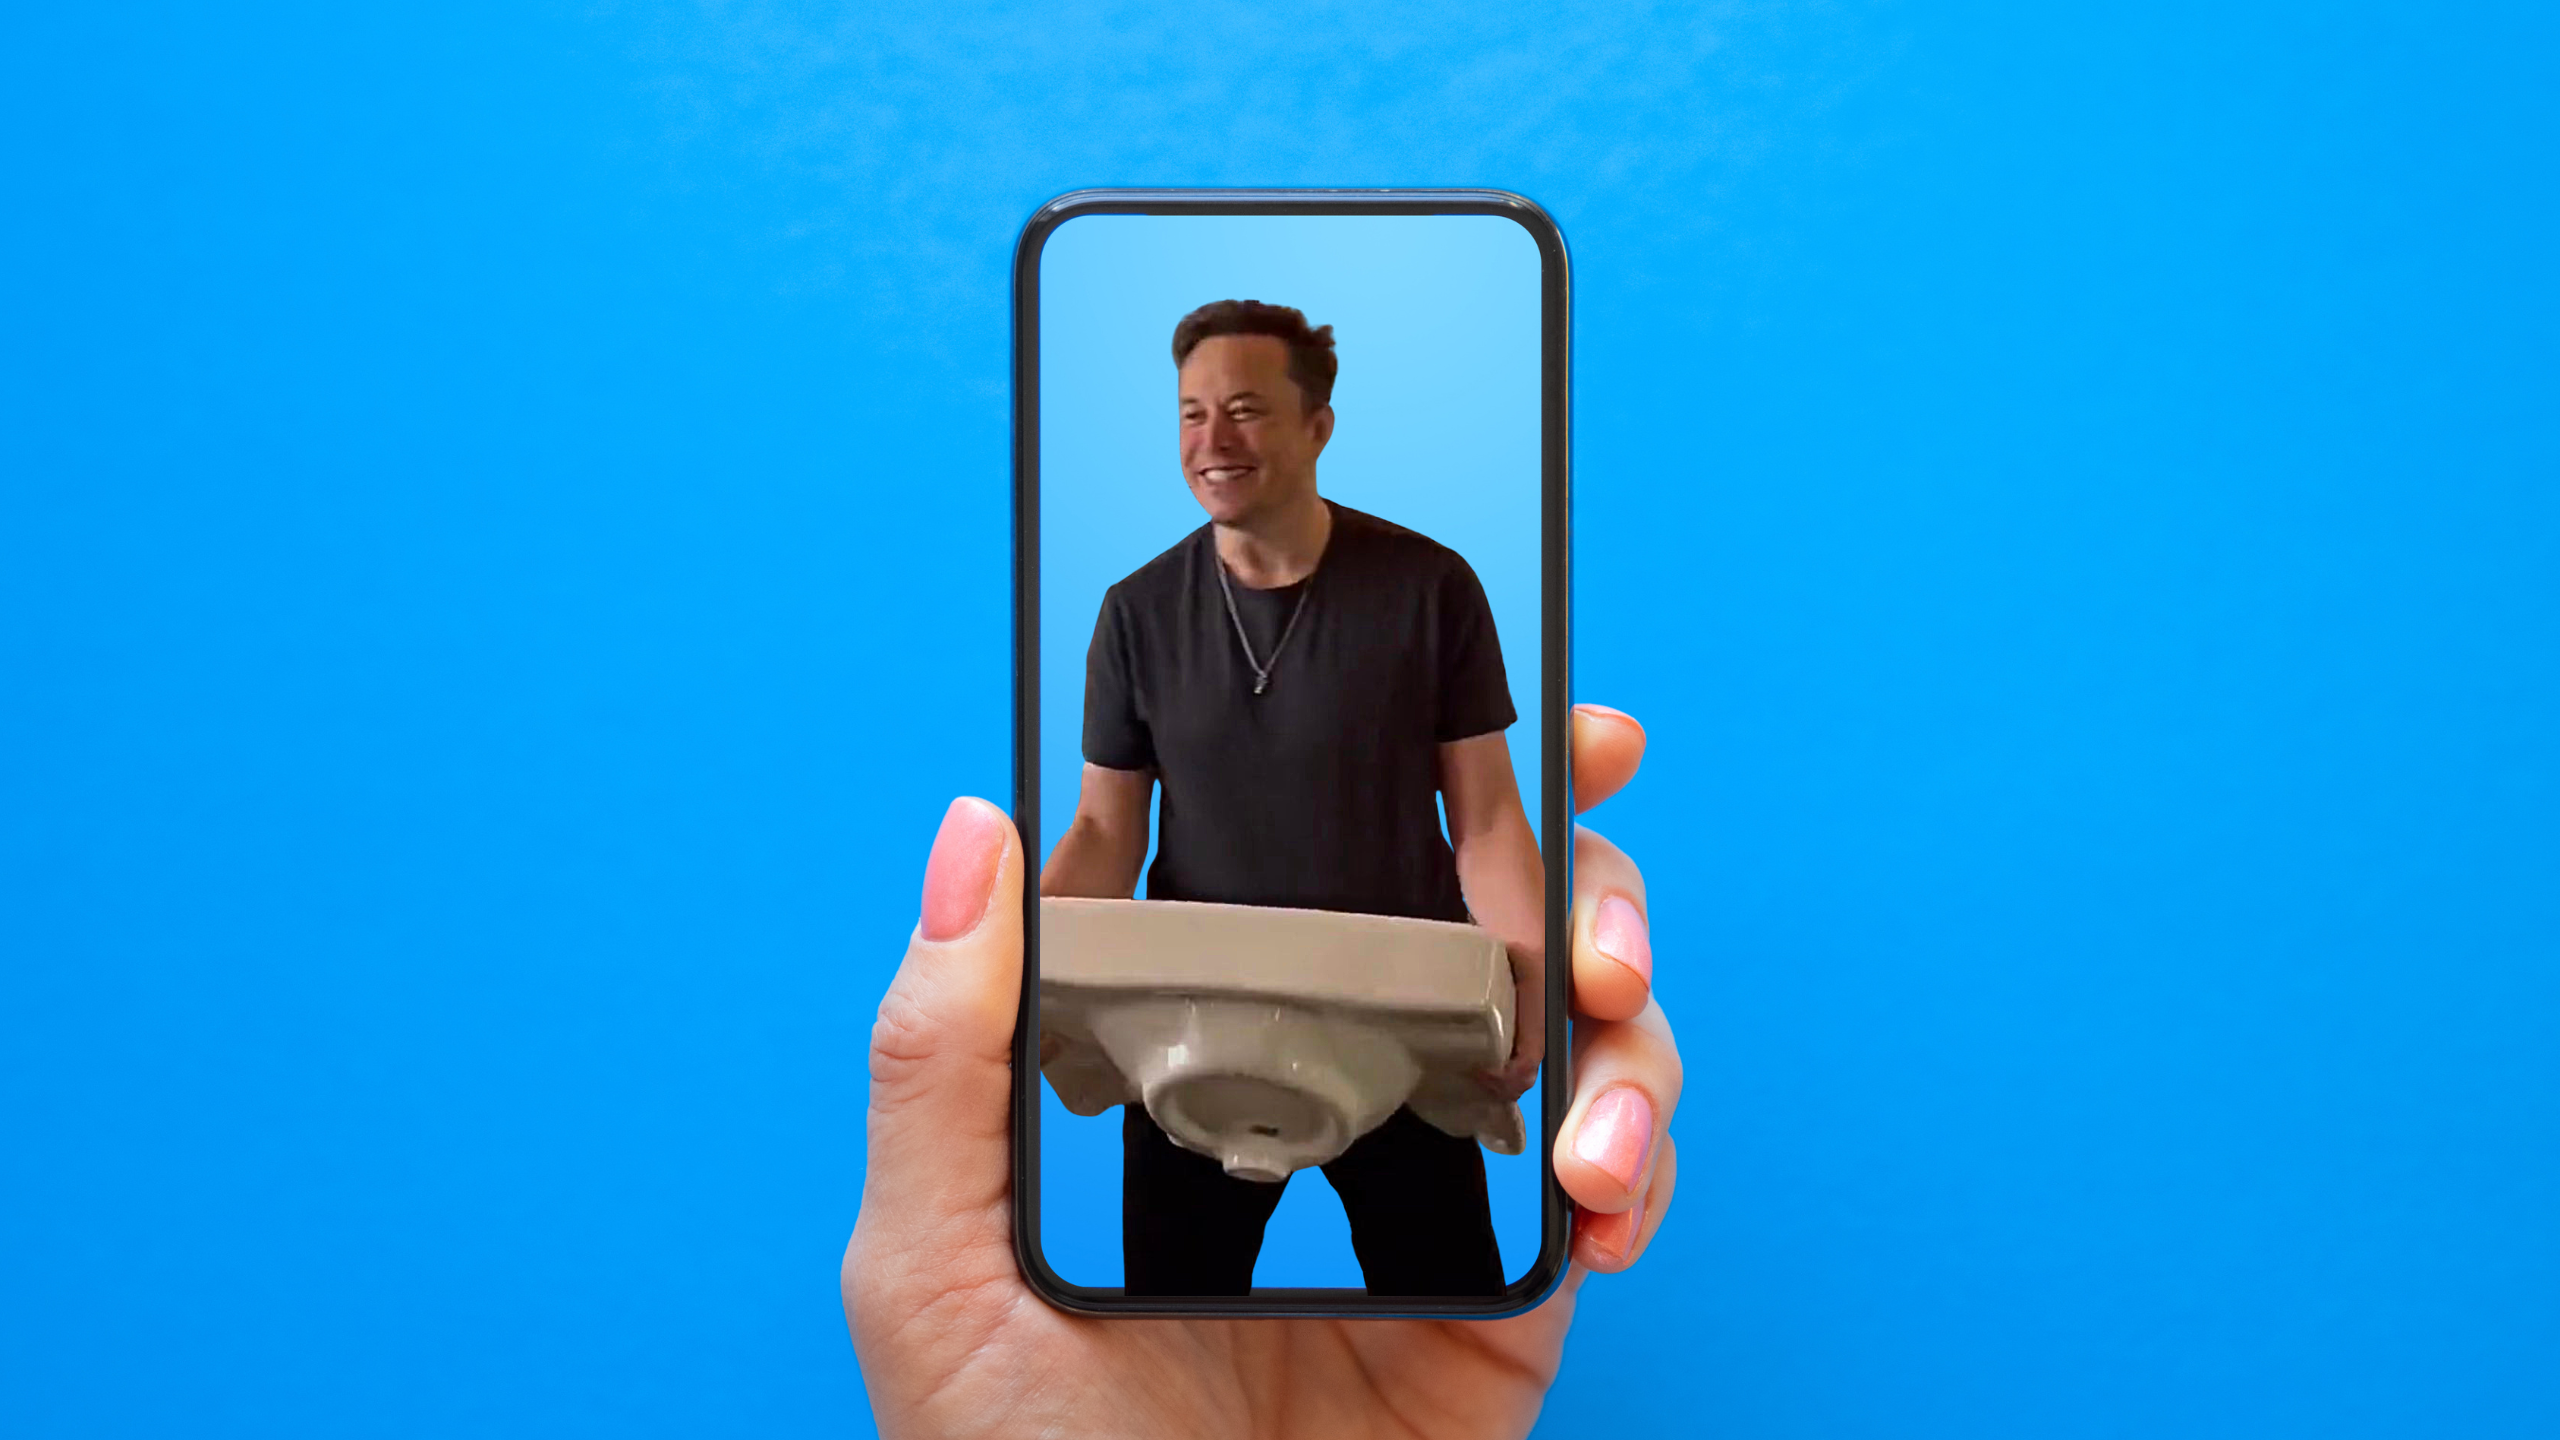 Elon Musk brings a sink to Twitter headquarters. They let him in.